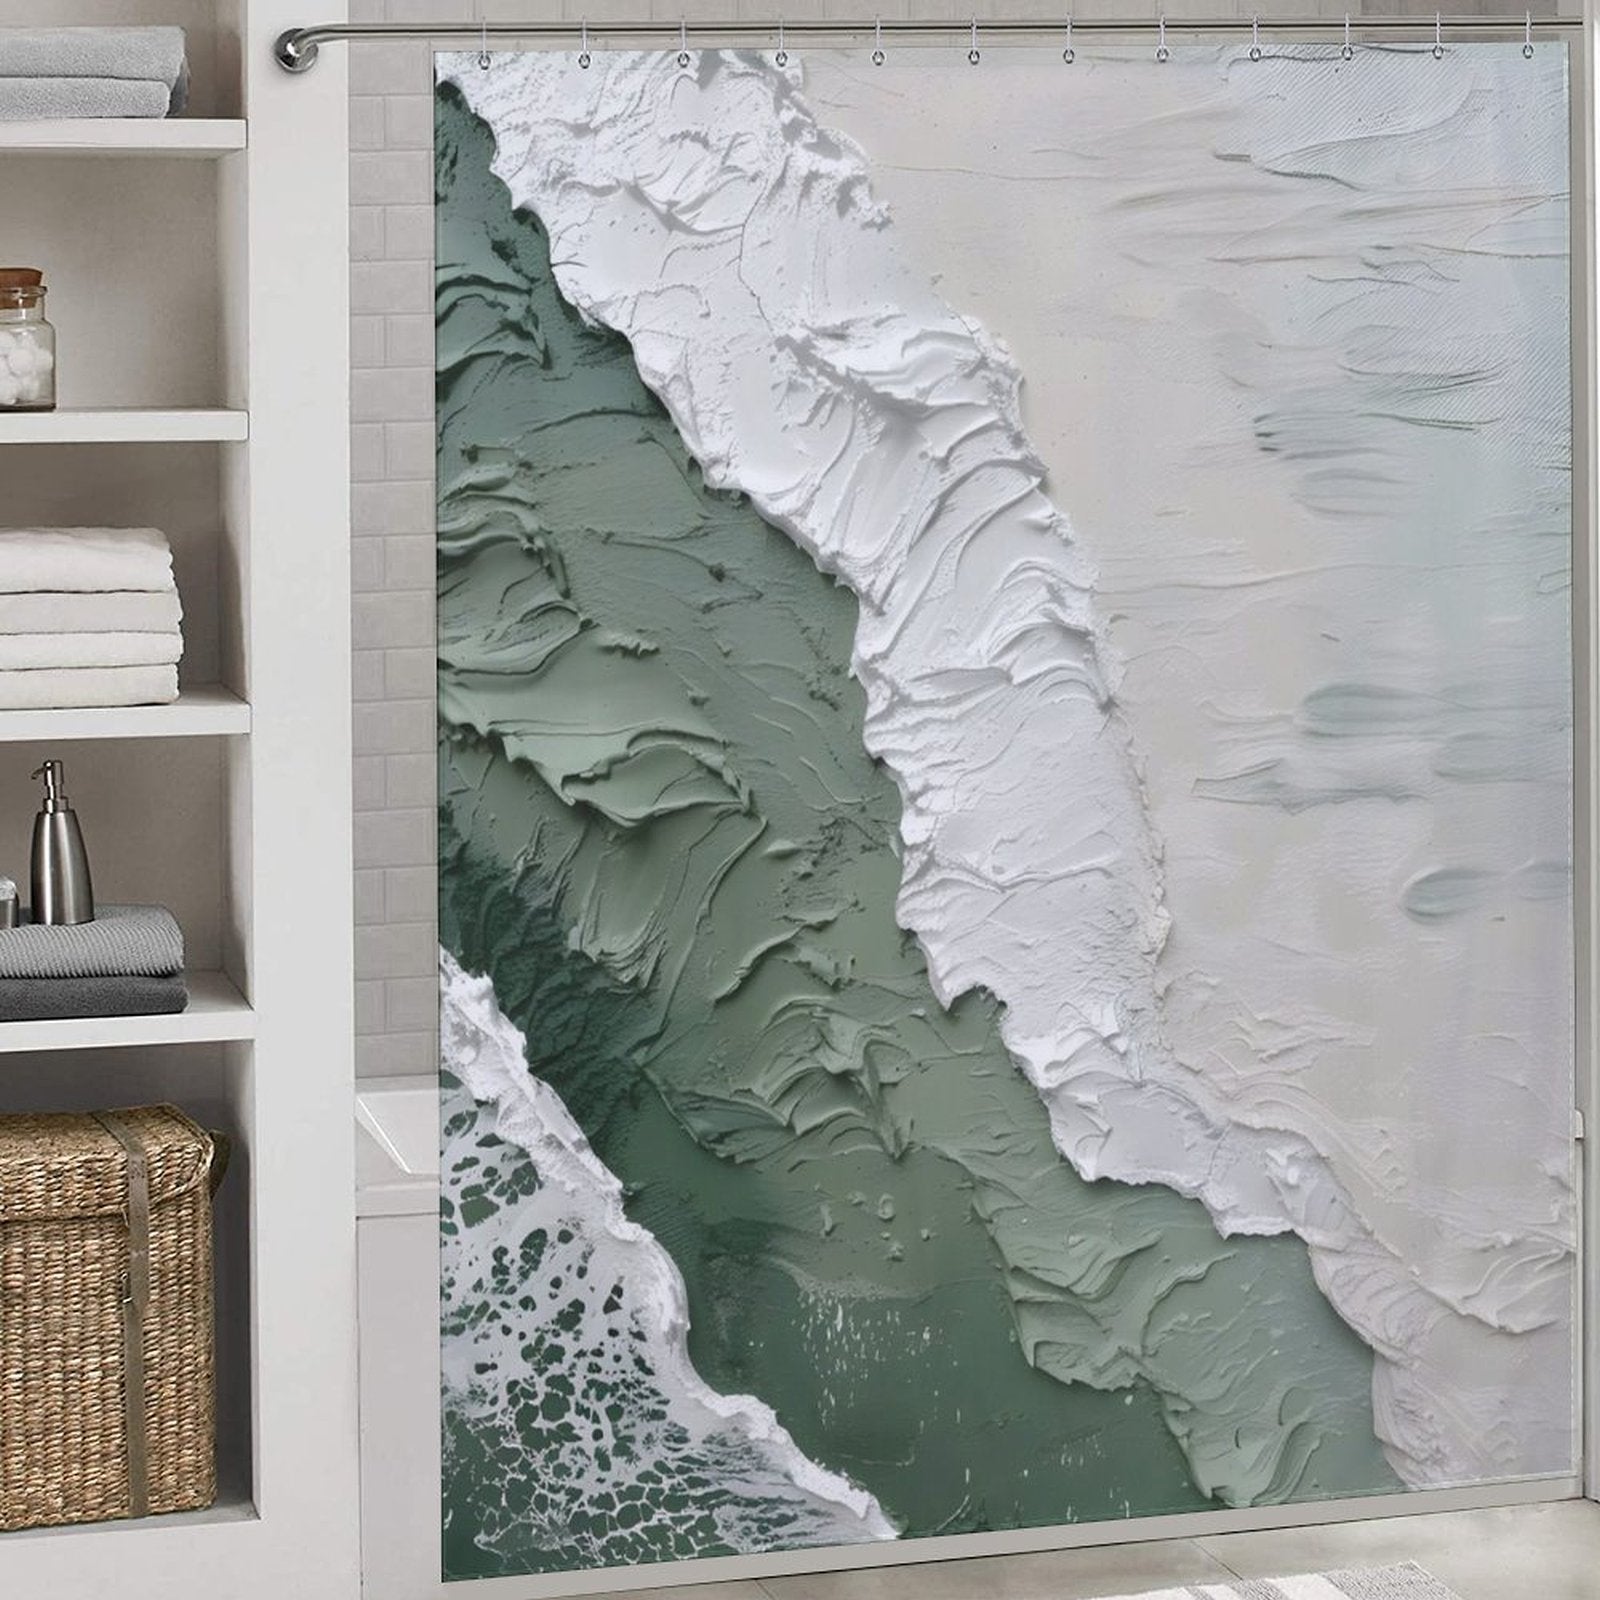 A Cotton Cat Coastal Oil Painting Ocean Sea Green Waves Minimalist Shower Curtain Abstract Beach Shower Curtain-Cottoncat displays an aerial view of a beach with ocean sea green waves crashing onto the shore, set in a bathroom with white shelves stocked with towels.